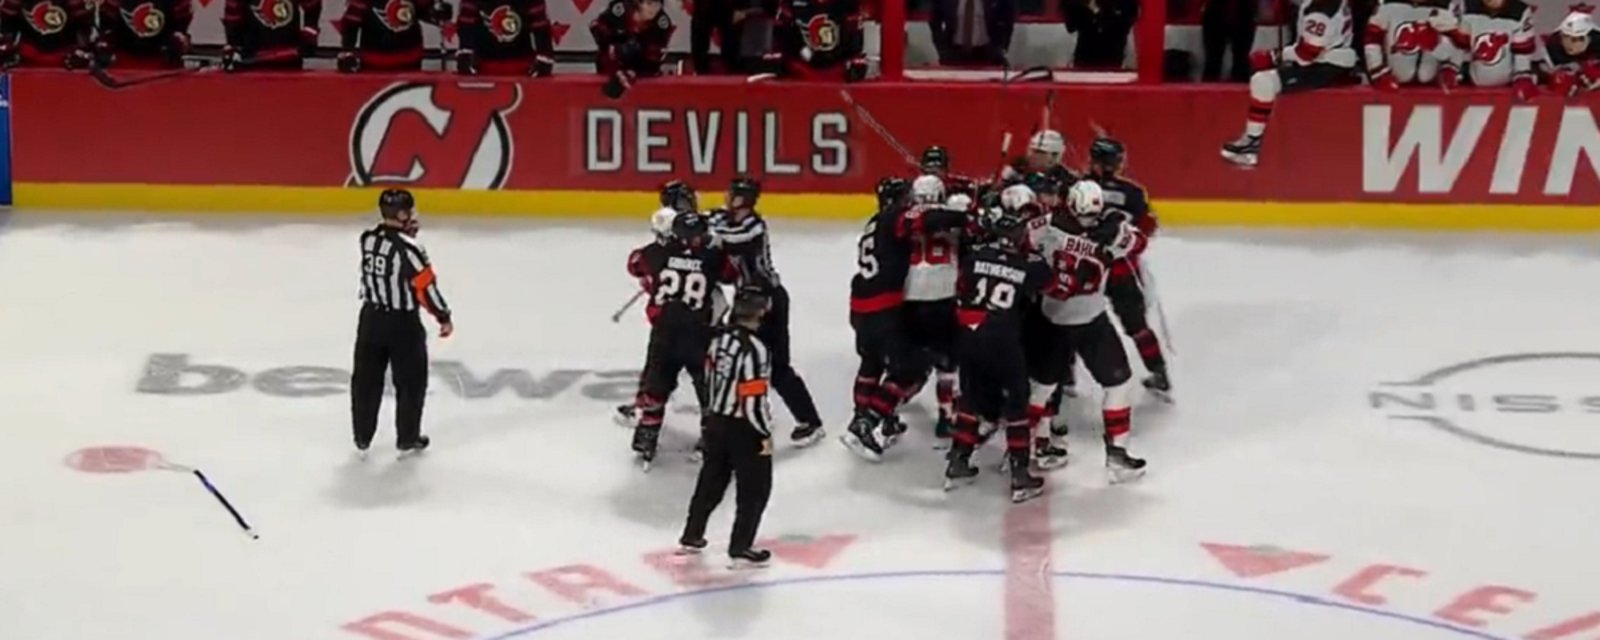 Brady Tkachuk causes a melee after losing it over empty net goal.